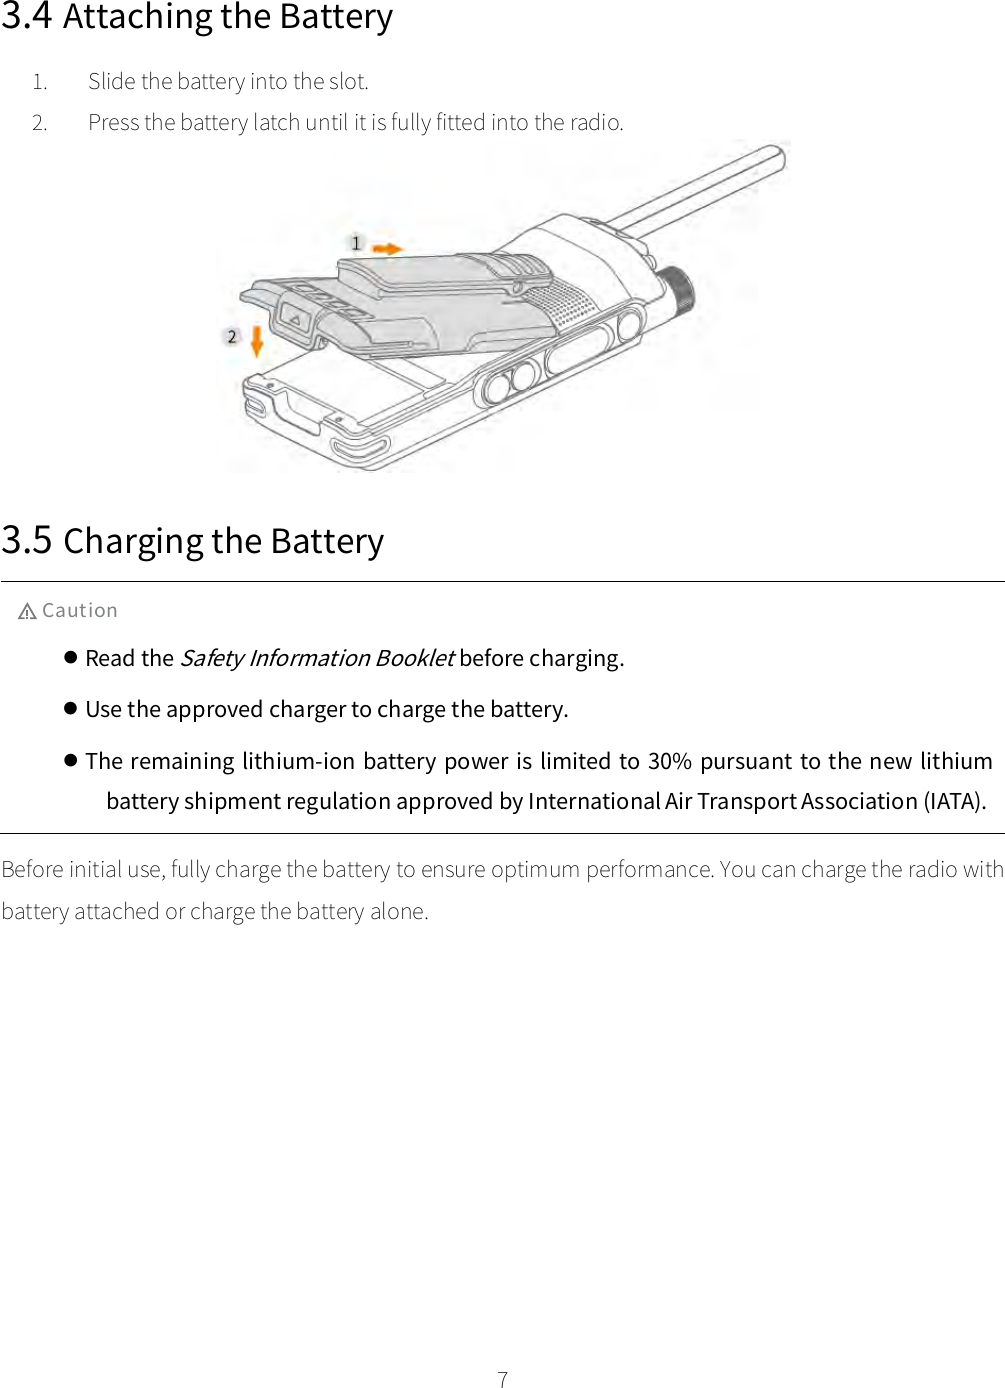    7  3.4 Attaching the Battery 1. Slide the battery into the slot. 2. Press the battery latch until it is fully fitted into the radio.  3.5 Charging the Battery Caution  Read the Safety Information Booklet before charging.  Use the approved charger to charge the battery.  The remaining lithium-ion battery  power is limited to 30% pursuant to the new lithium battery shipment regulation approved by International Air Transport Association (IATA). Before initial use, fully charge the battery to ensure optimum performance. You can charge the radio with battery attached or charge the battery alone. 